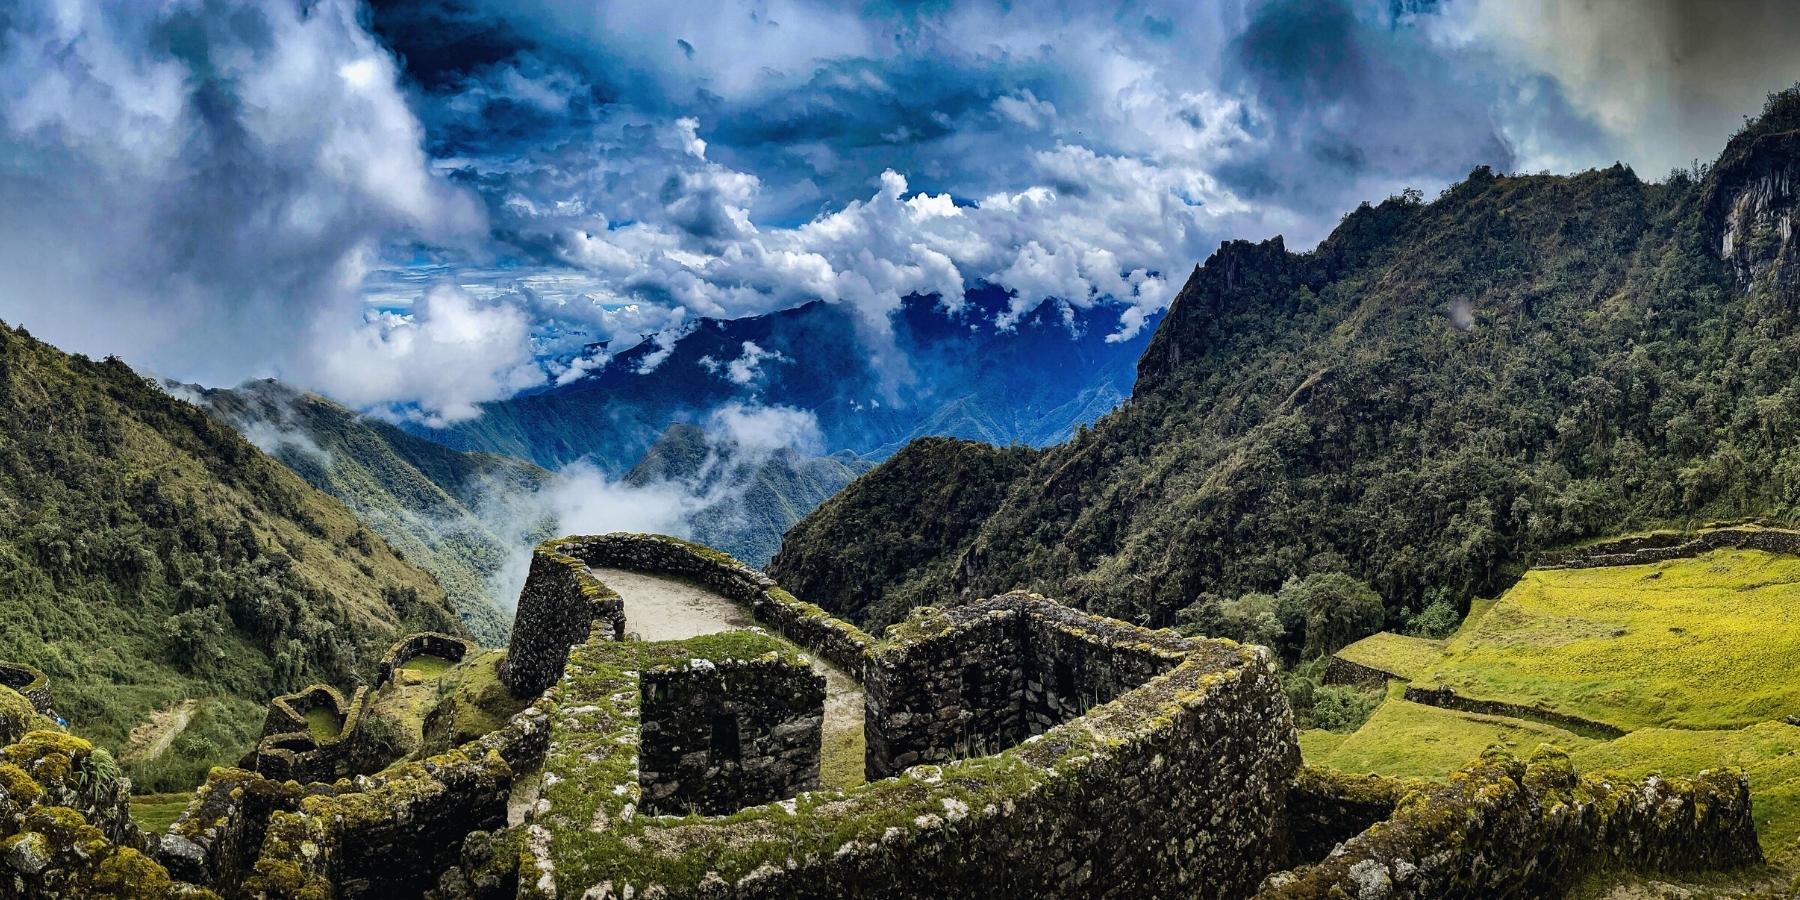 WHAT TO EXPECT ON THE INCA TRAIL TO MACHU PICCHU